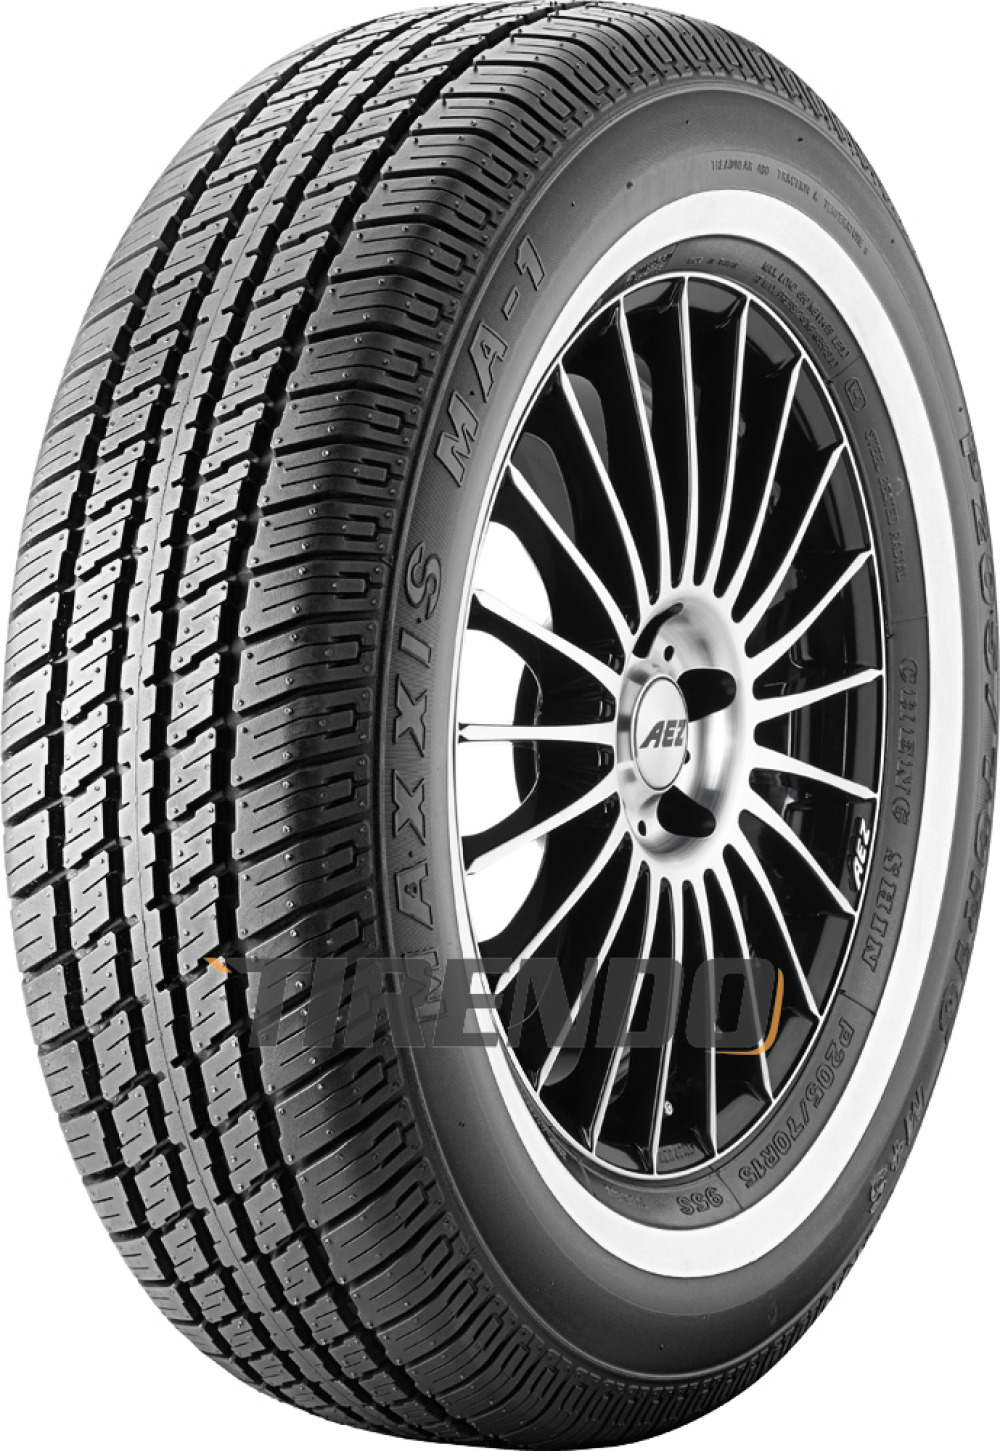 Image of Maxxis MA 1 ( P165/80 R13 83S WSW 15mm )